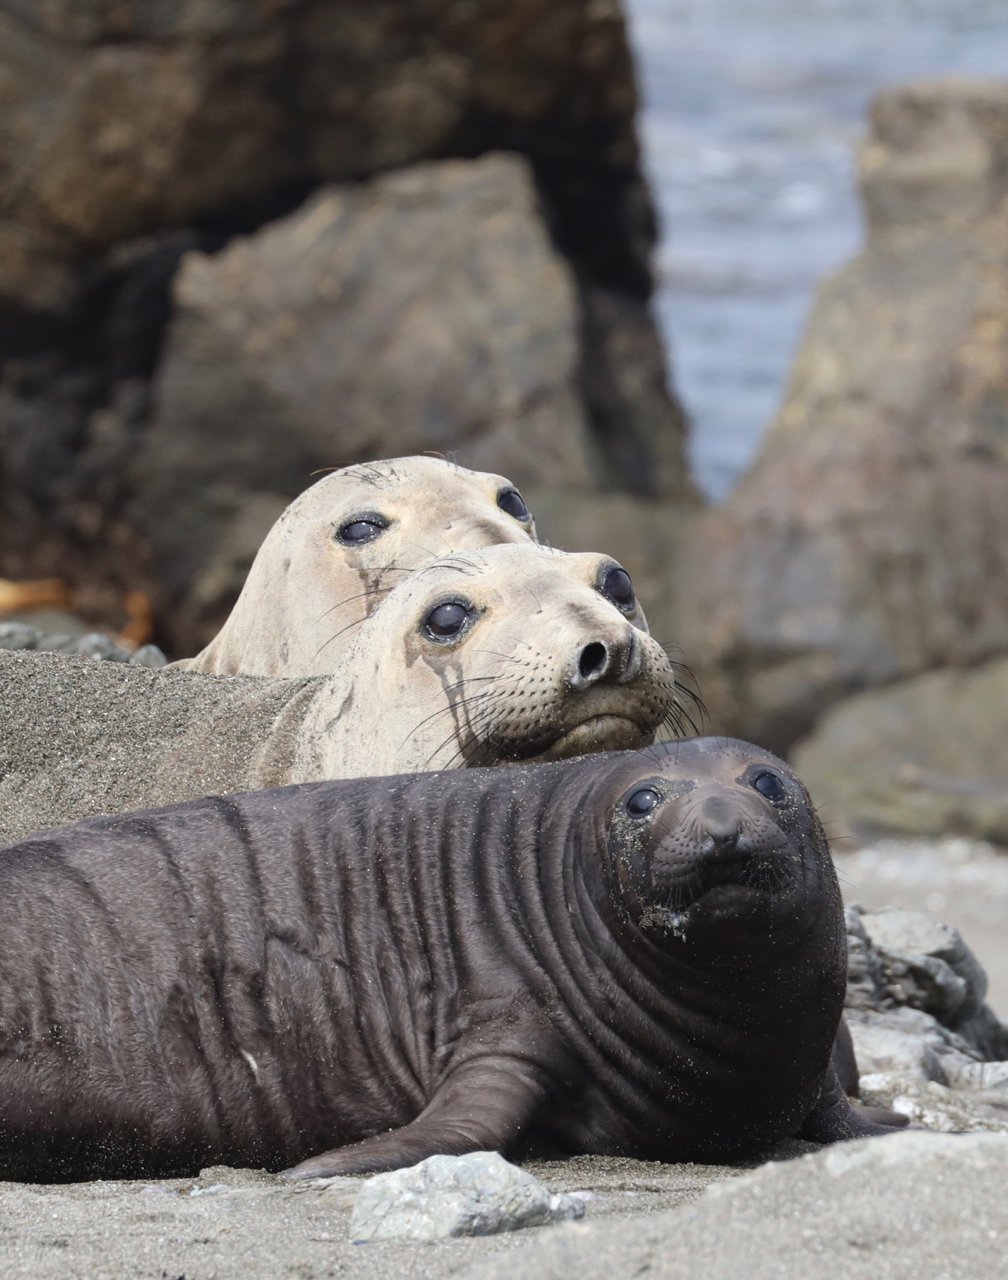 Northern elephant seals at San Benito Islands, photo by Marc Webber